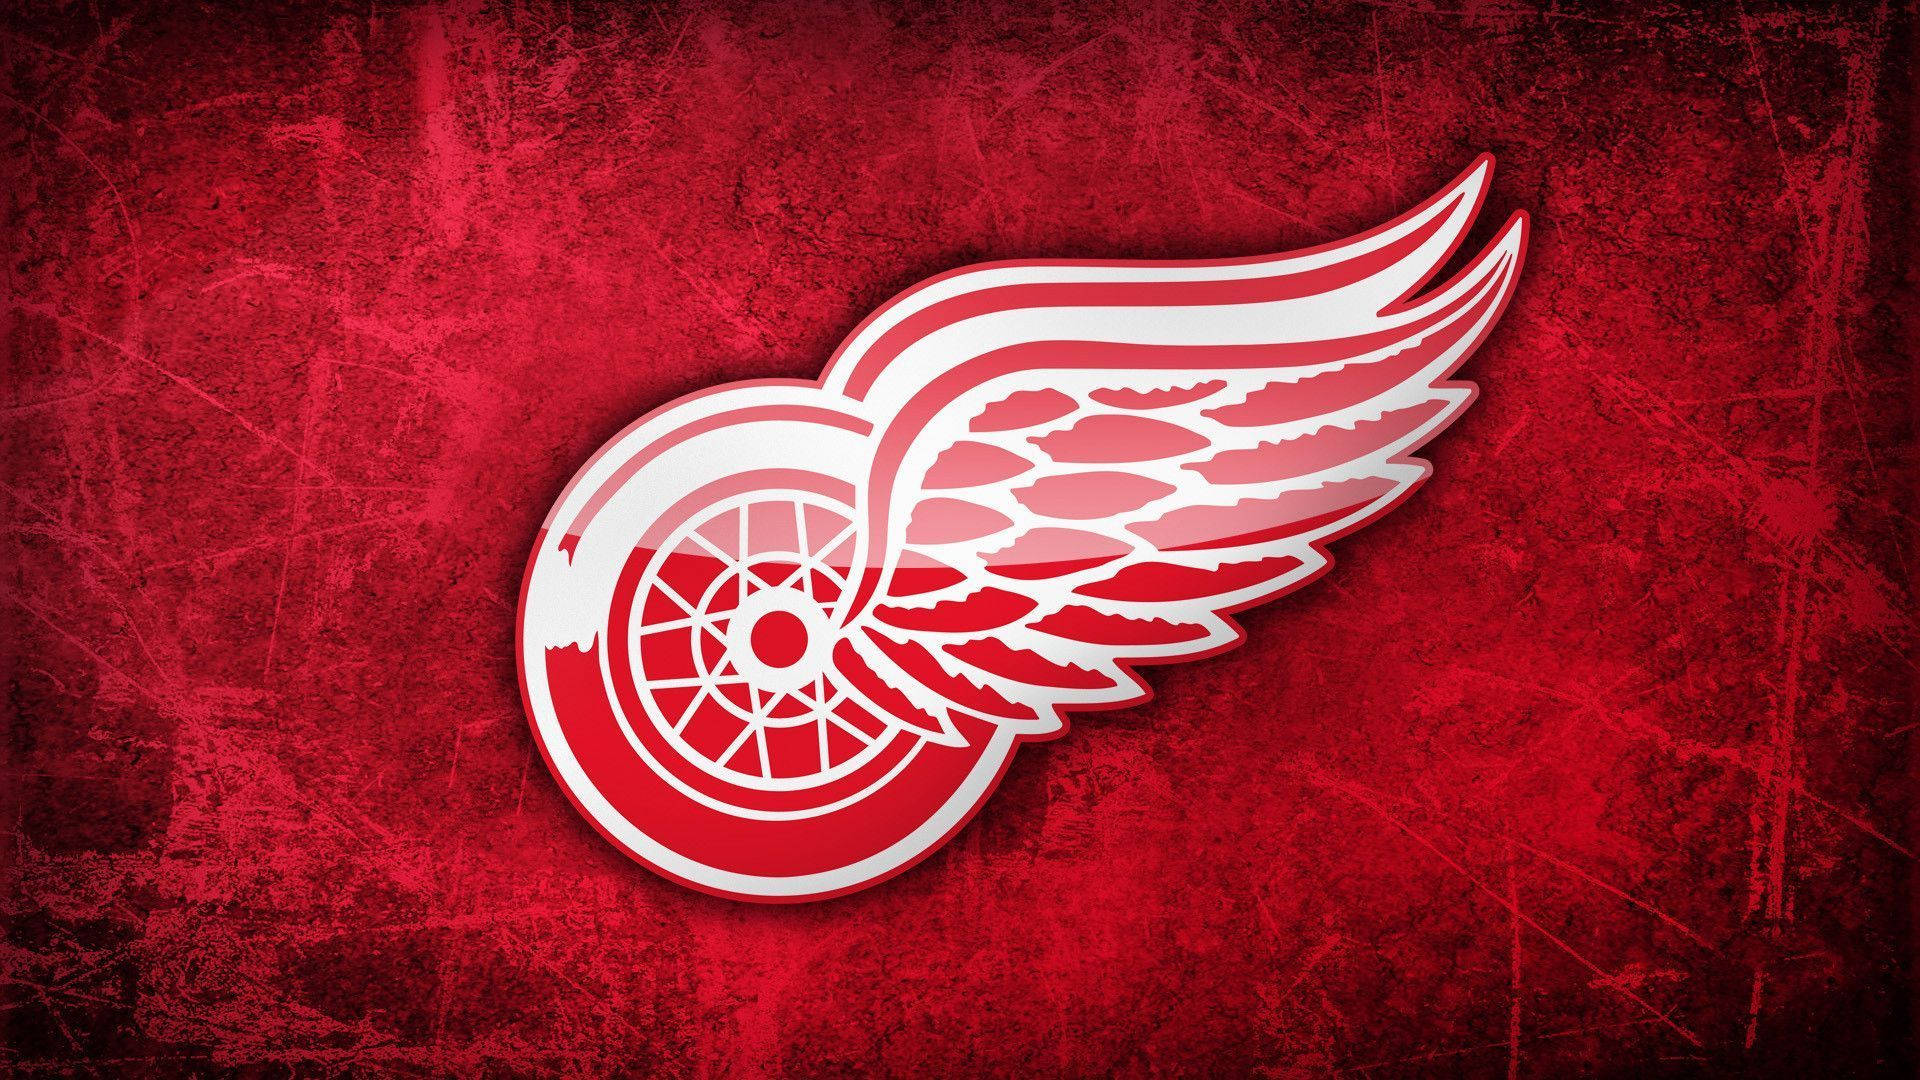 200+] Detroit Red Wings Pictures